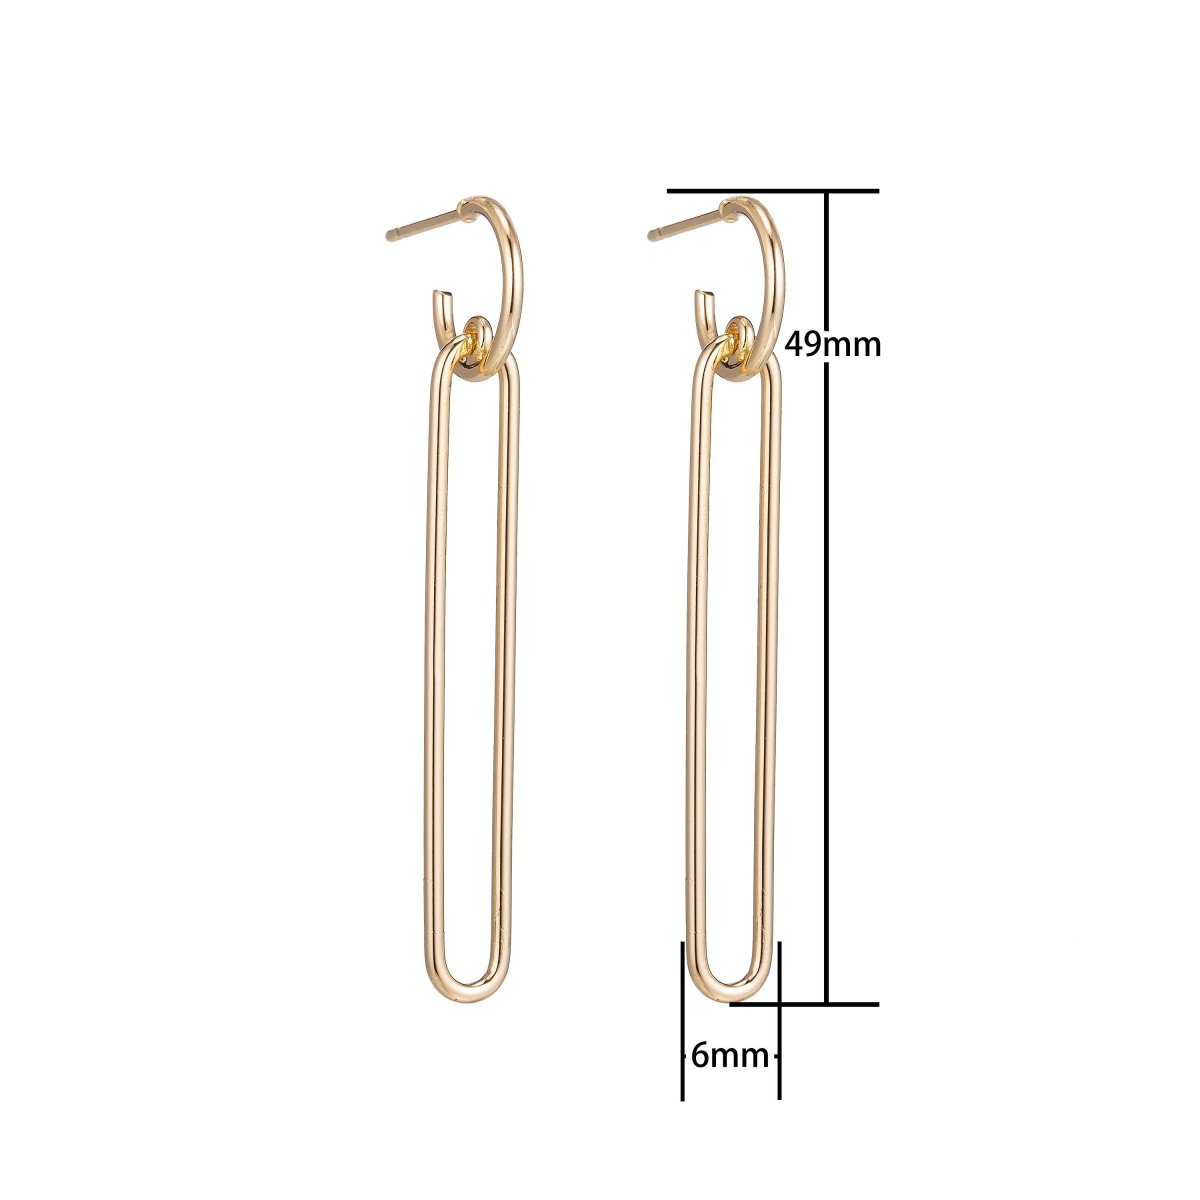 OS Dangle 18k Gold Fill Chained Earrings, Looped Earrings, Make Your Own Earring Kit Findings for Jewelry Making Supplies K-020 - DLUXCA